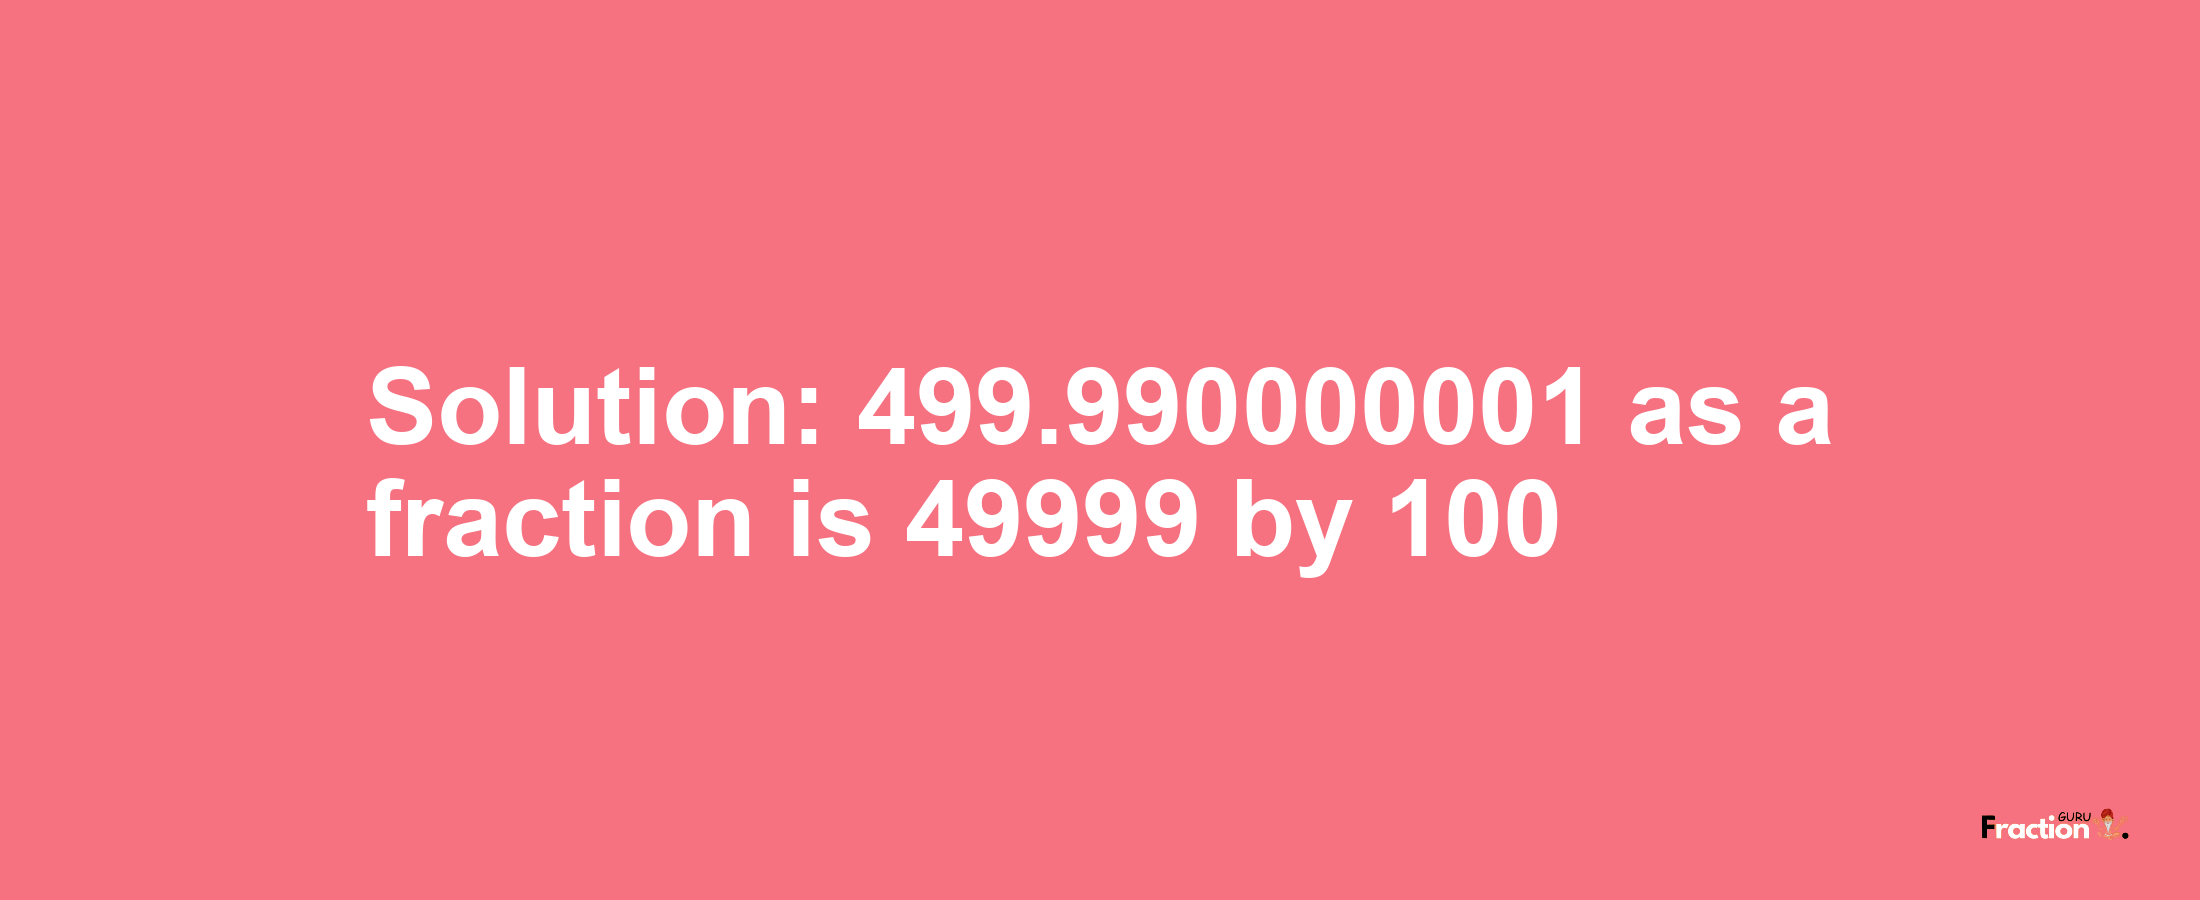 Solution:499.990000001 as a fraction is 49999/100